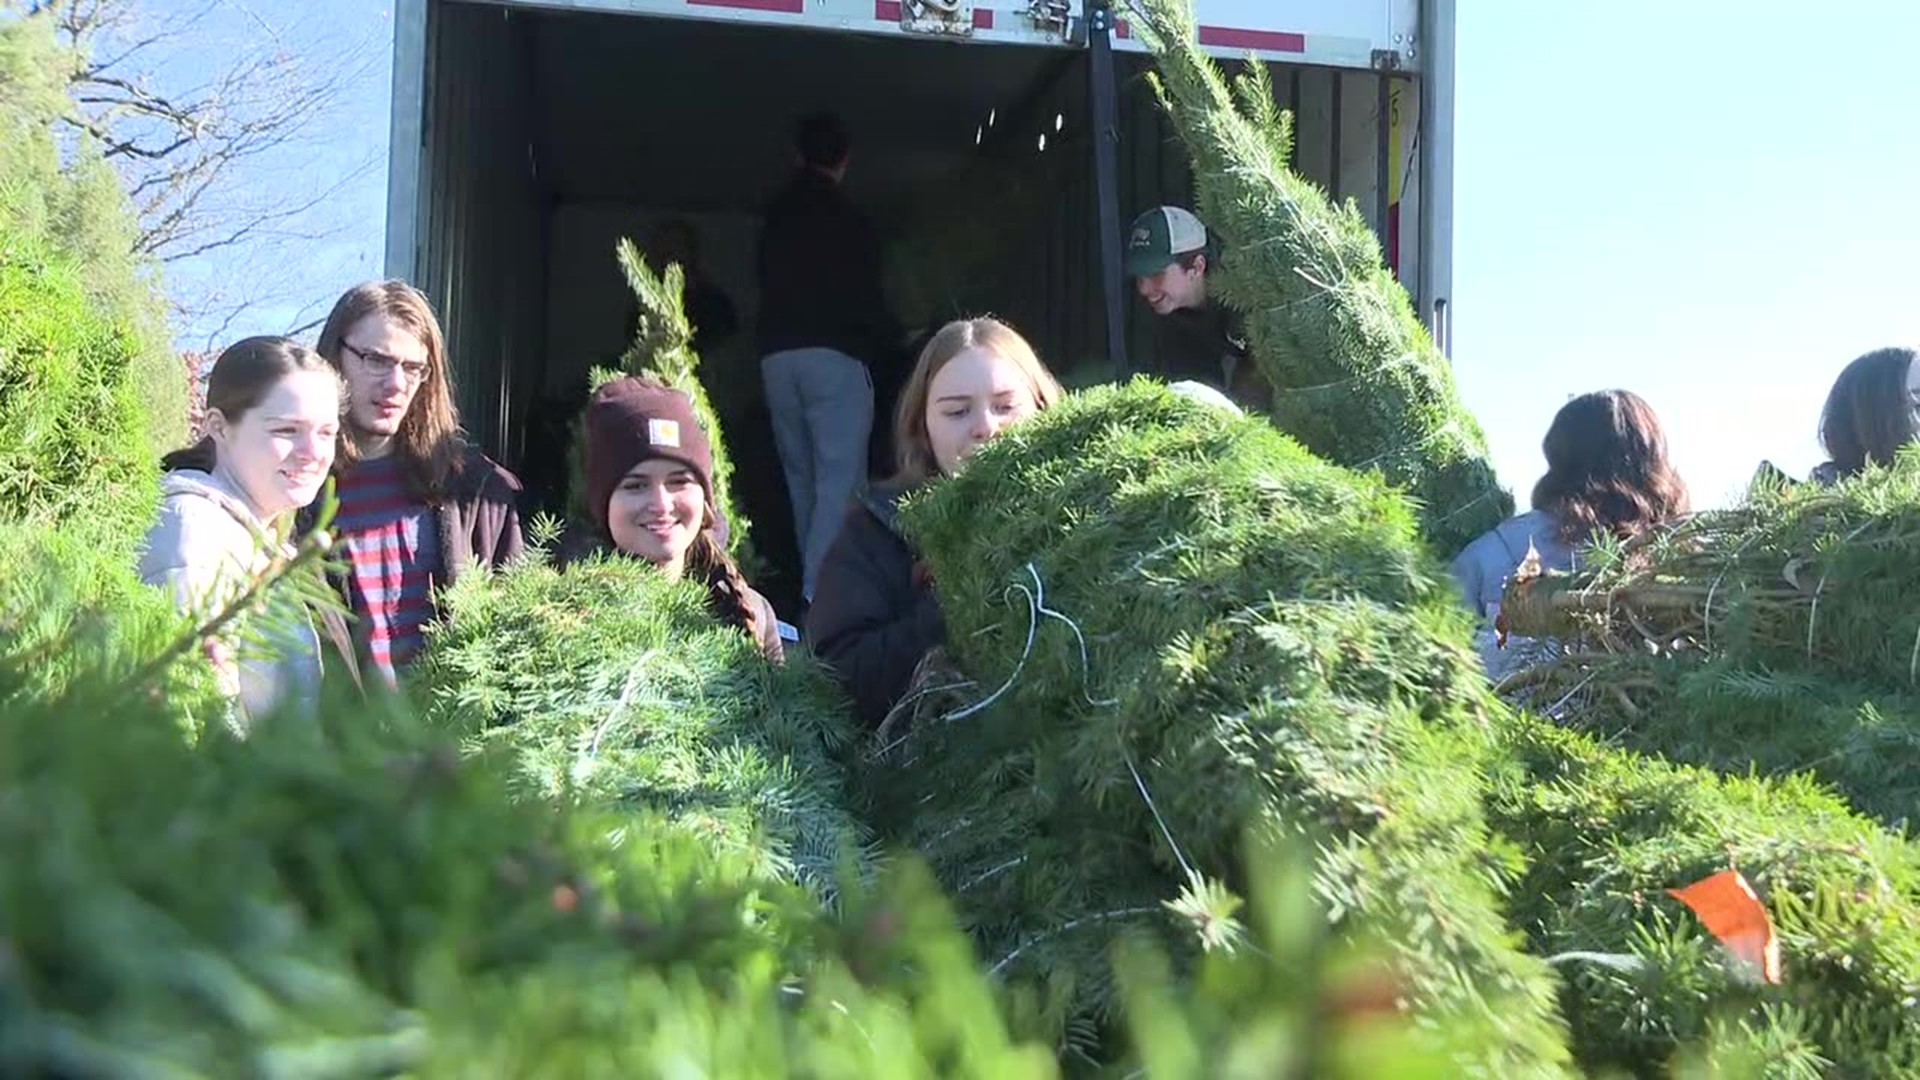 This is the 18th year Yenser's Tree Farm has sent Christmas trees to deployed service members.